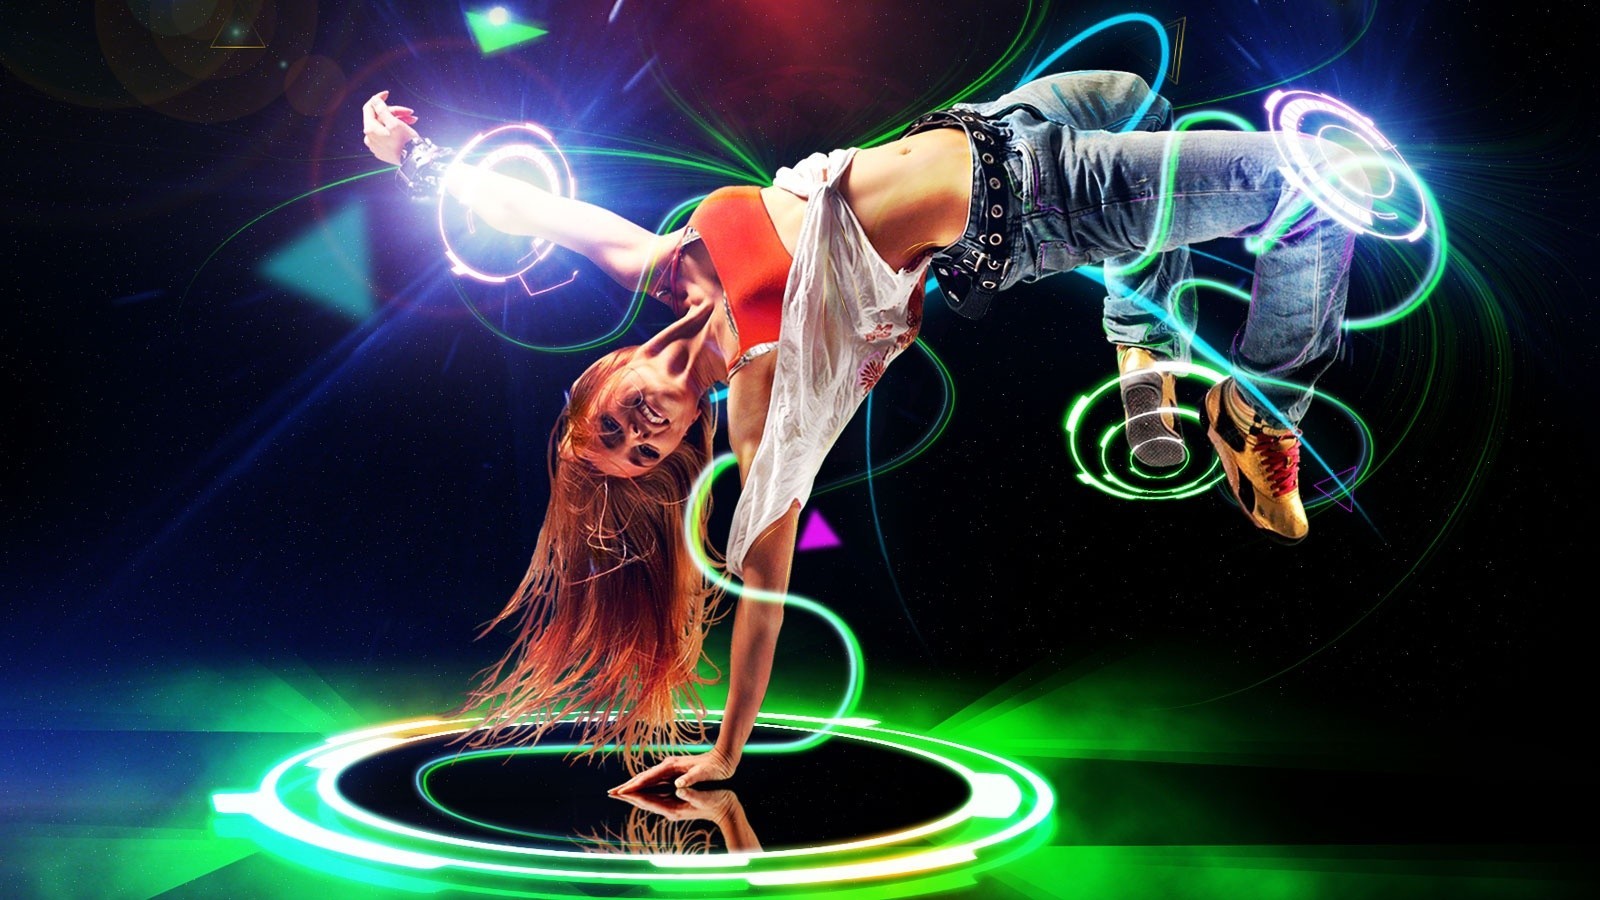 Wallpaper, illustration, dancing, rave, disco, breakdance, performance, stage, screenshot, computer wallpaper, special effects 1600x900